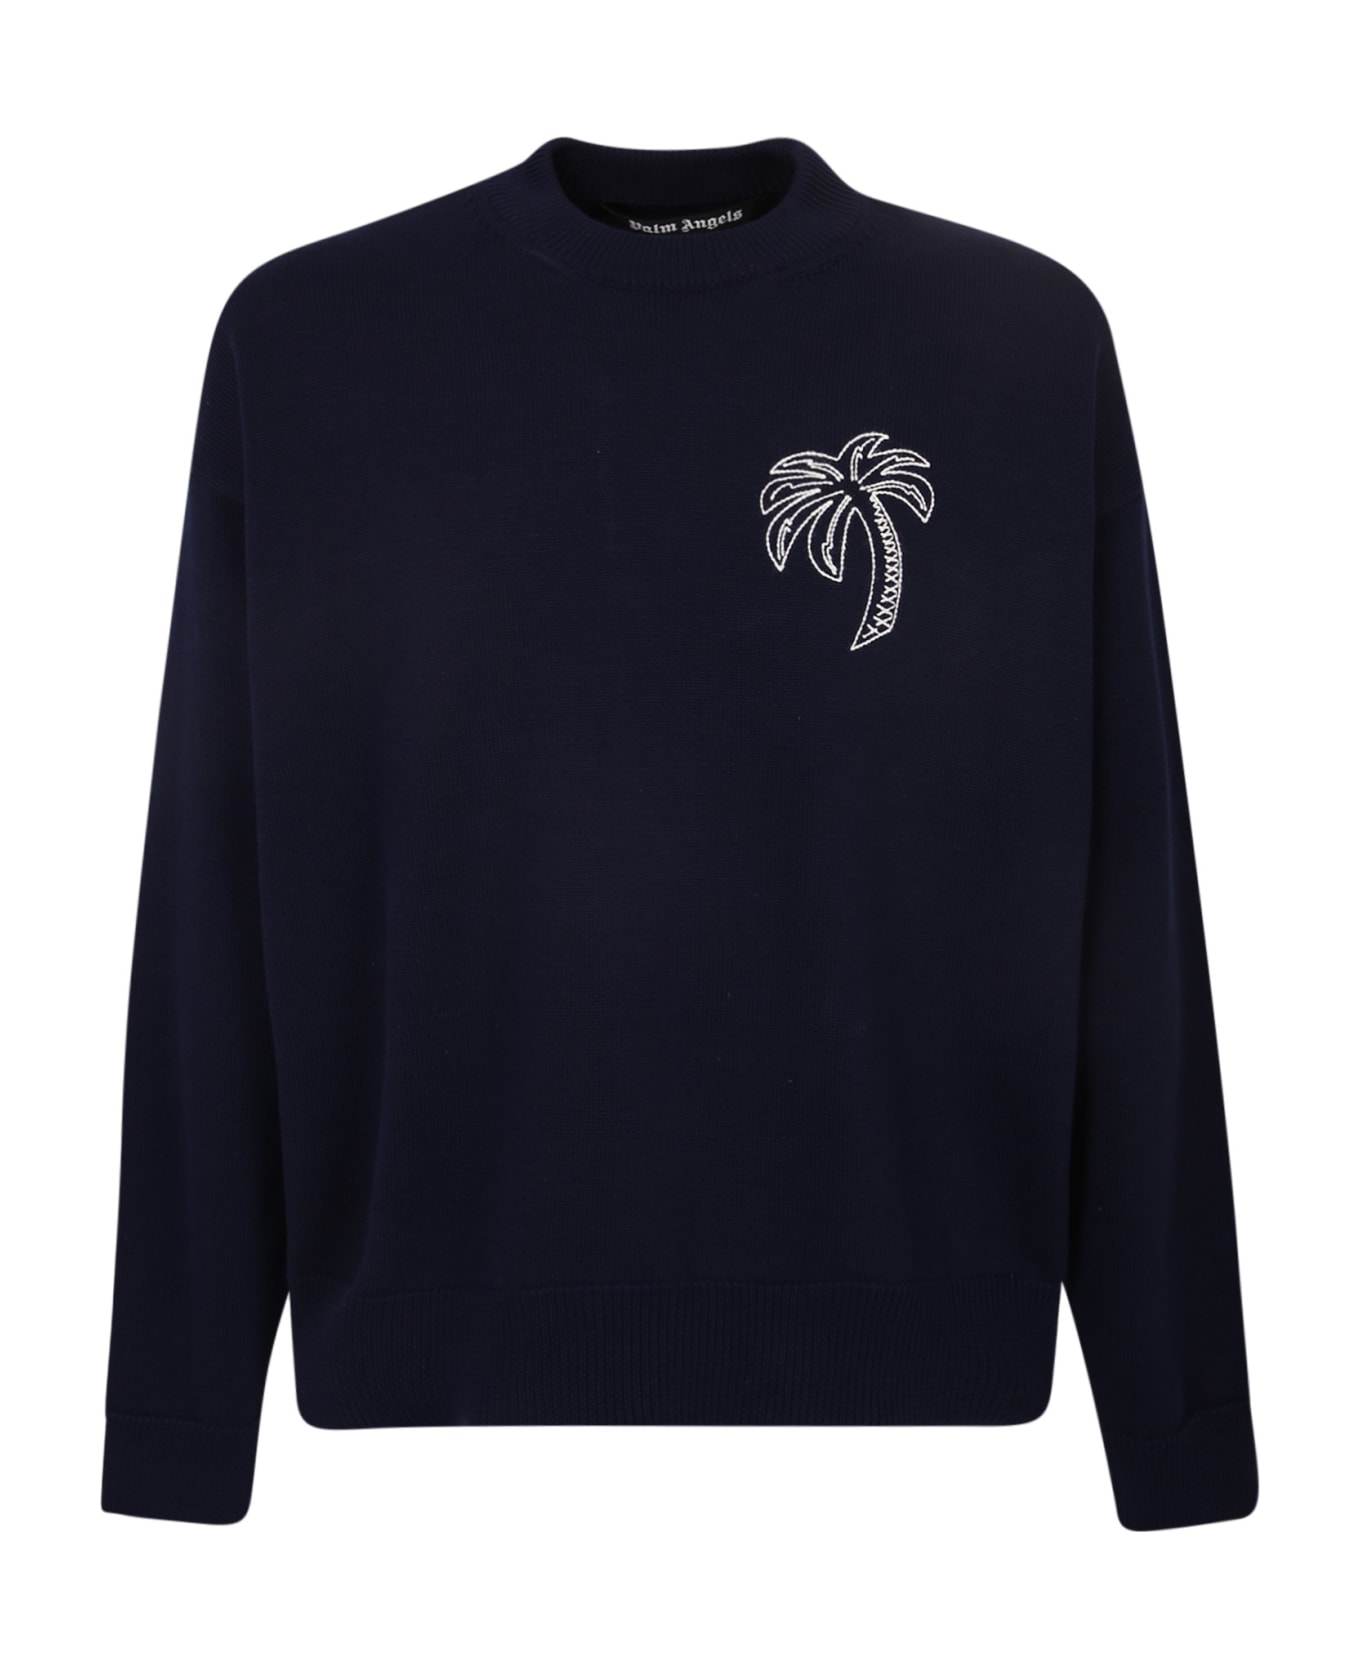 Palm Angels Embroidered Palm Sweater - Black